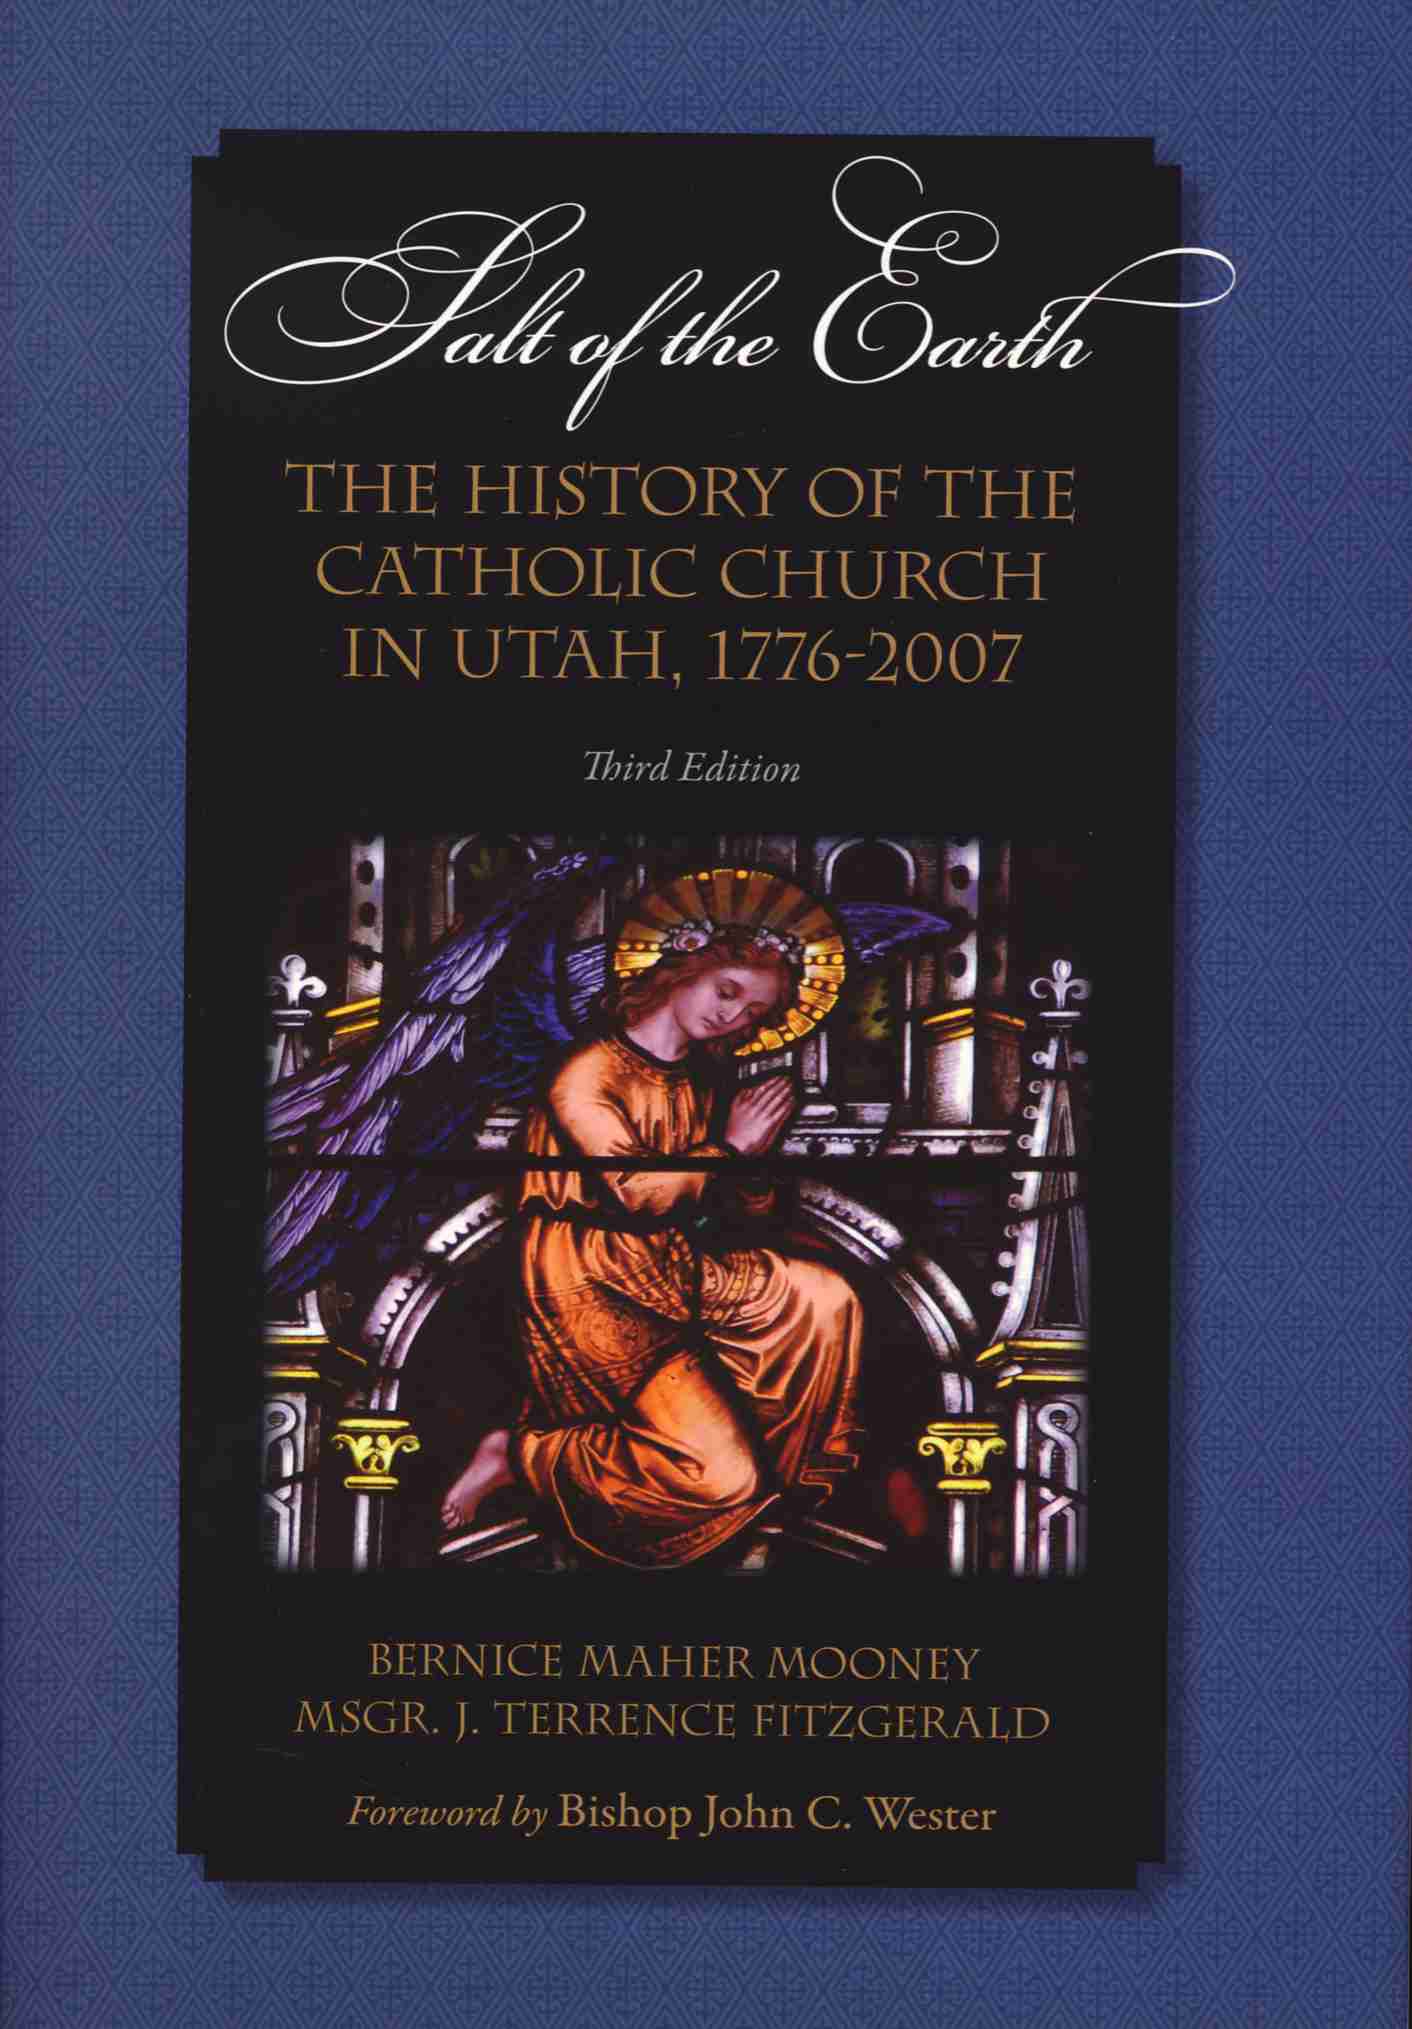 Book: Salt of the Earth, The History of the Catholic Church in Utah, 1776-2007